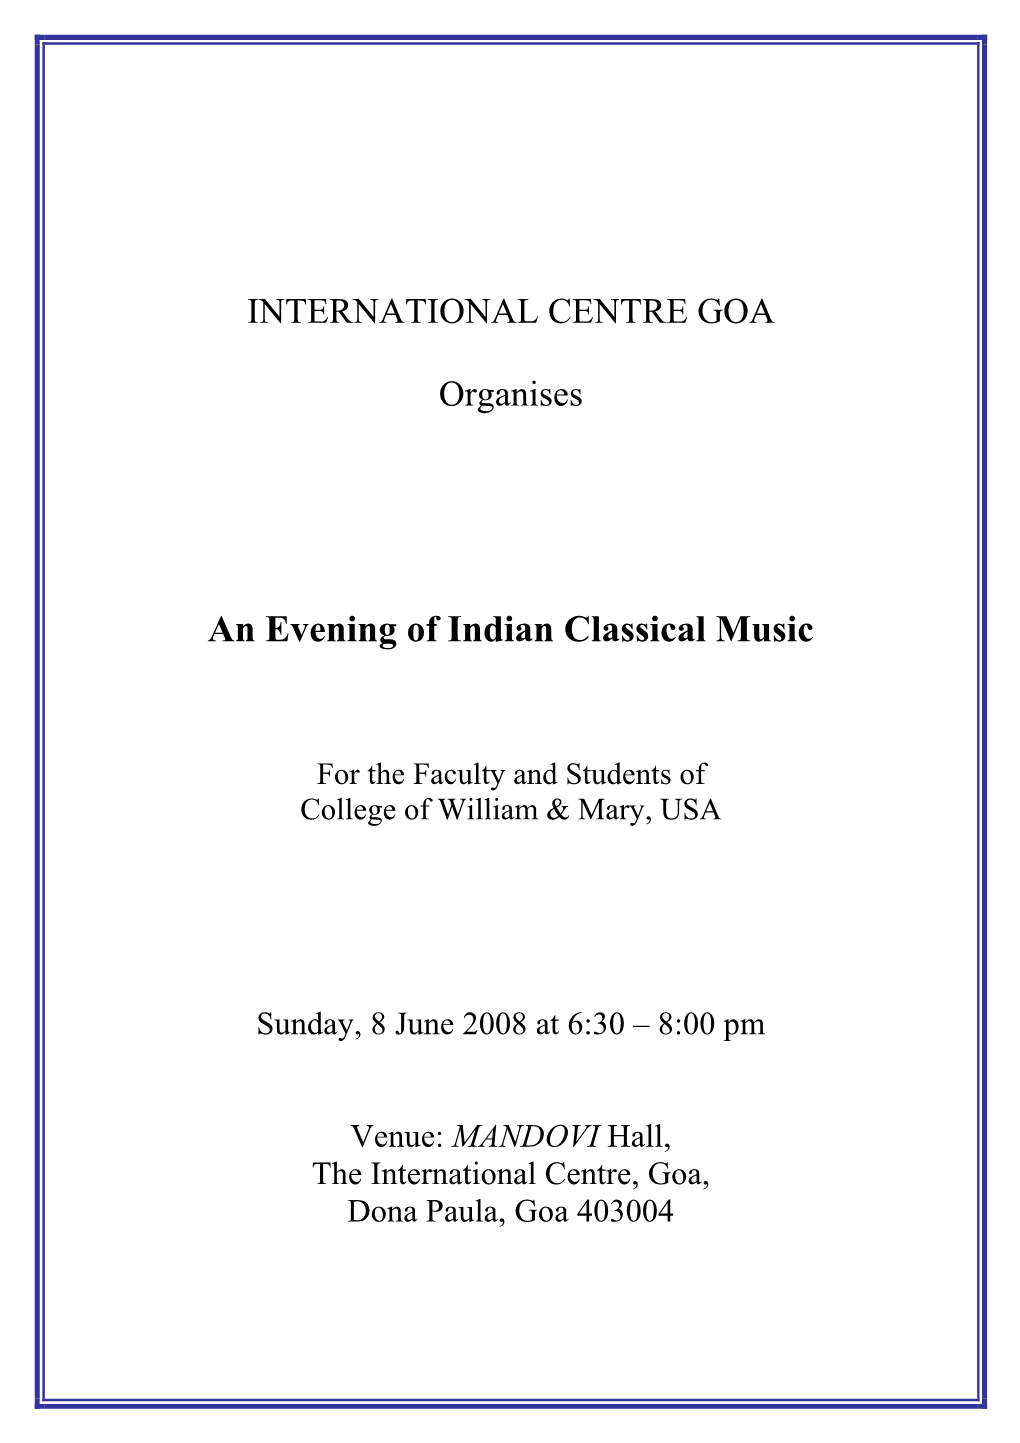 An Evening of Indian Classical Music